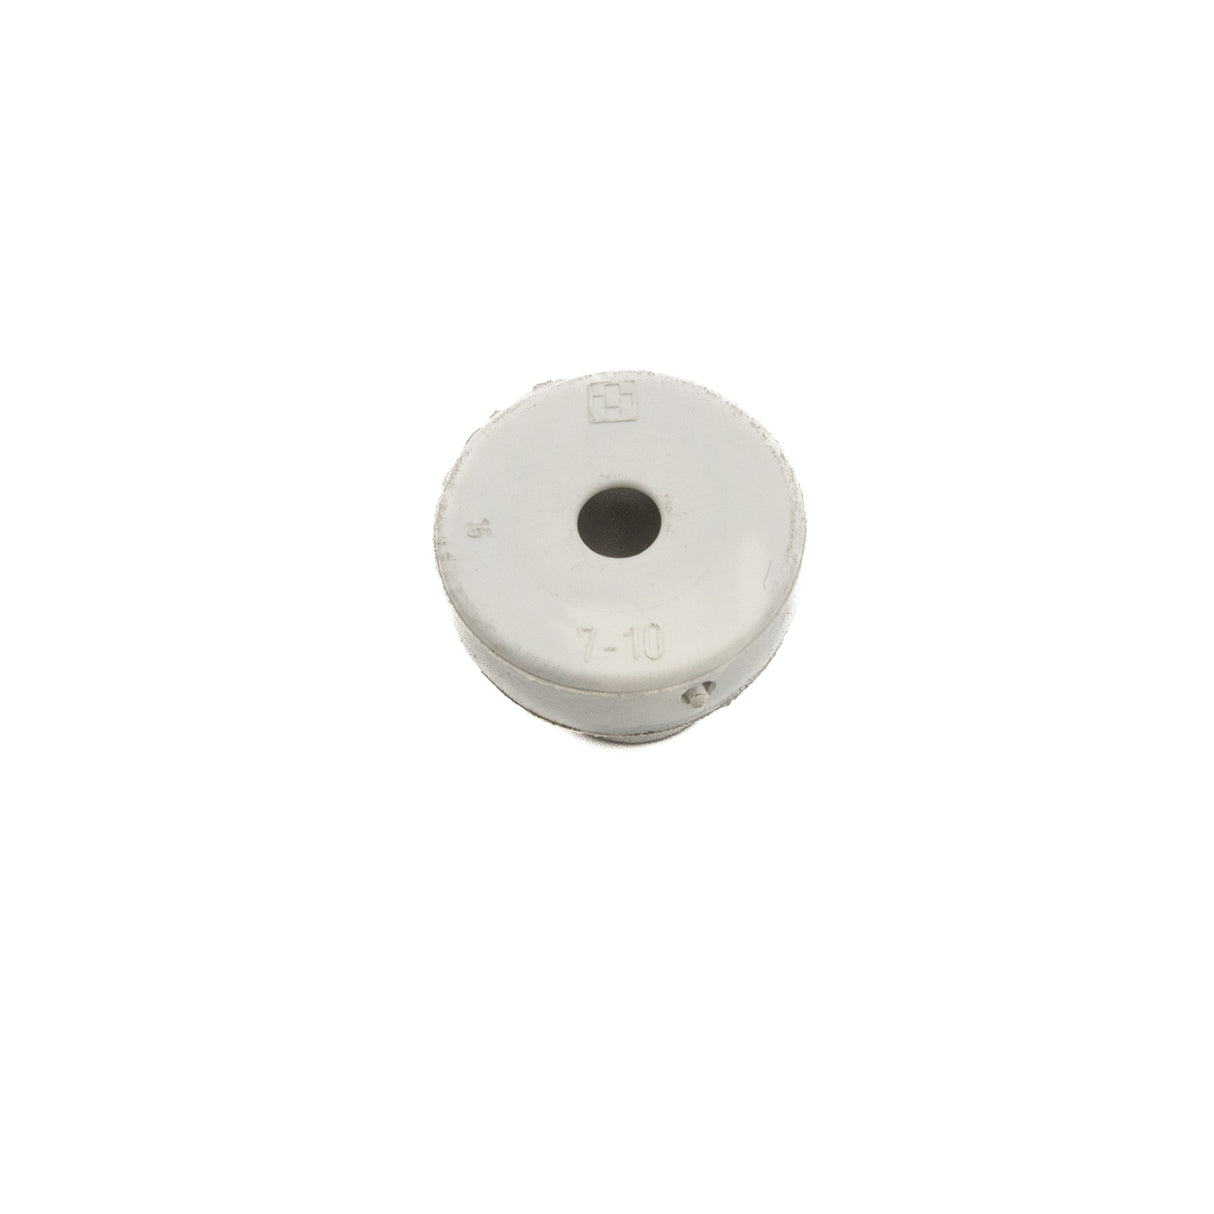 Boxco BC-RG-PG29 Rubber Cable Gland Grommet 38 mm Hole Ivory - PHOTO 2